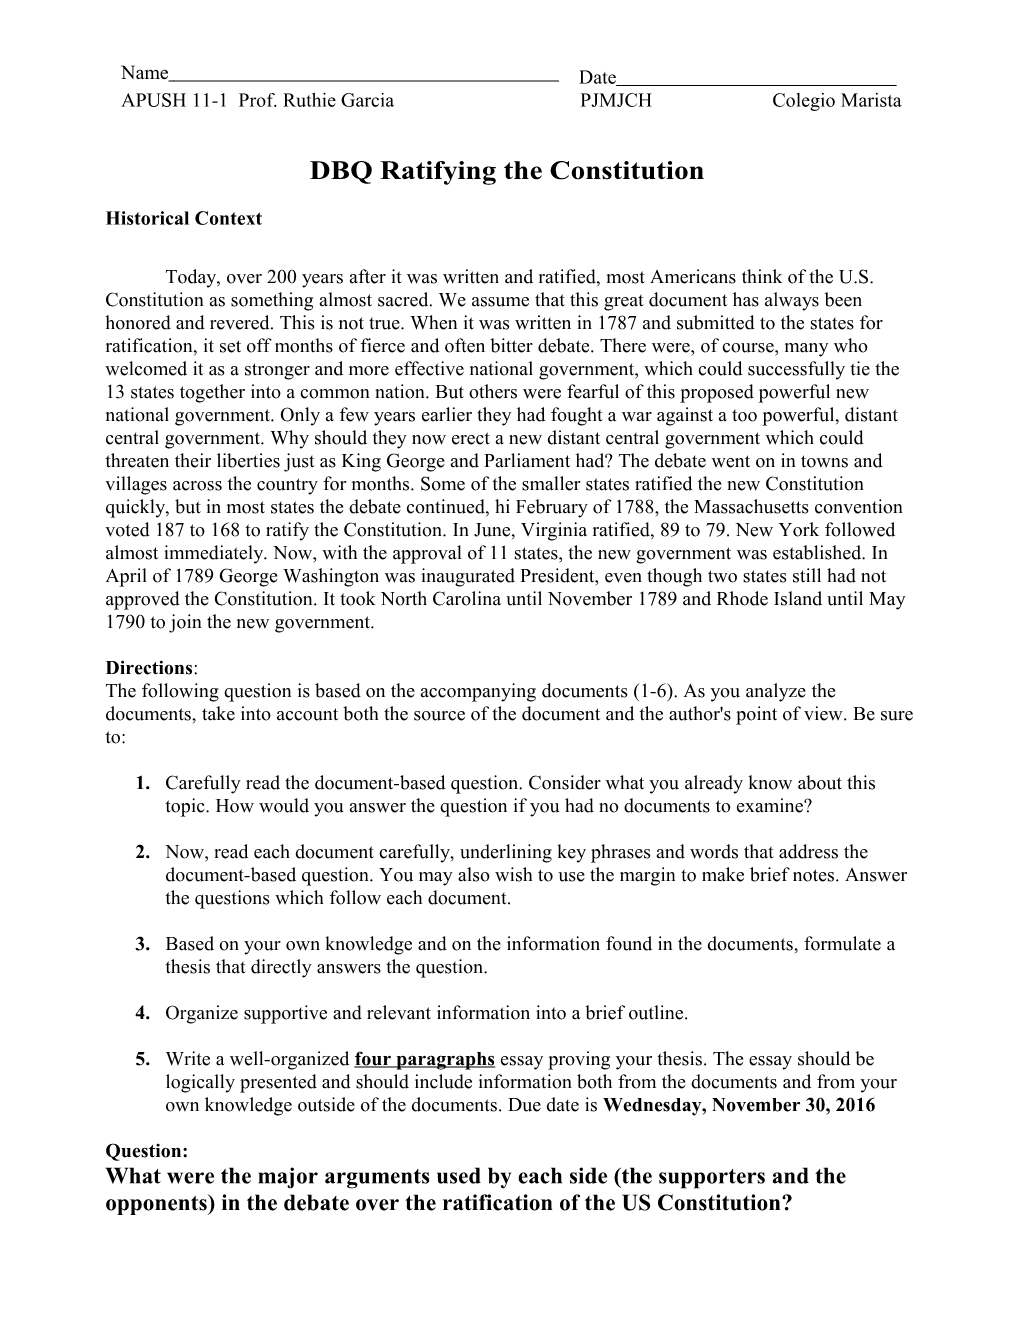 Document Based Question: Ratifying the Constitution s1